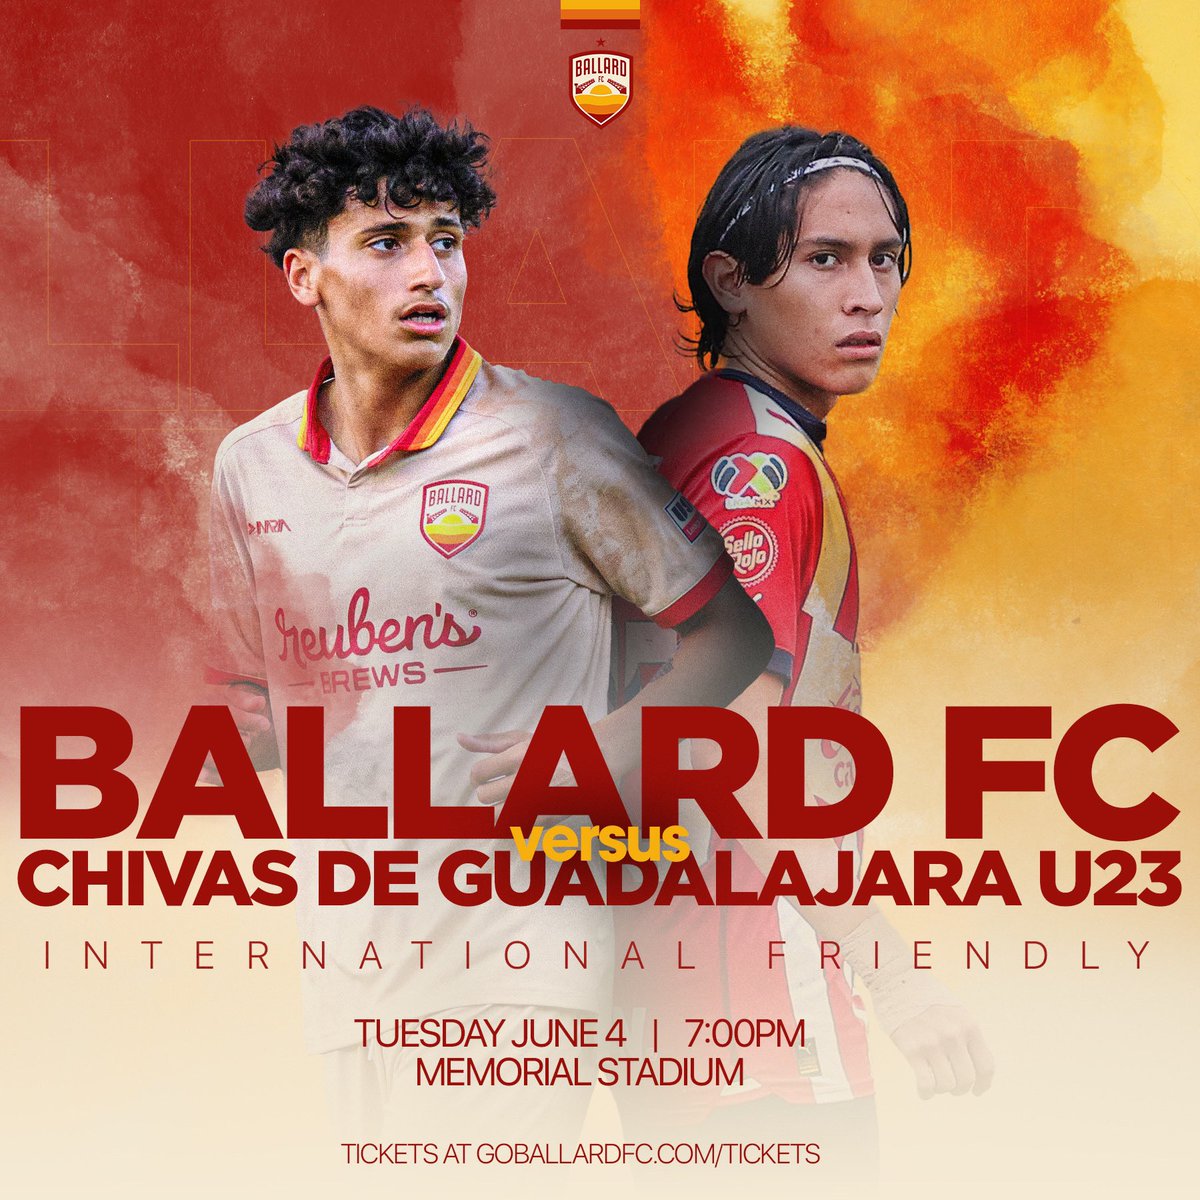 ¡Batellón de Campeones! We’re excited to announce we will be playing @Chivas U23 in a friendly match at Memorial Stadium on June 4th at 7:00PM! The champions of @USLLeagueTwo versus the champions of @LigaBBVAMX Apertura U23 🔥 🎟️: bit.ly/BFCvsCHIVAS